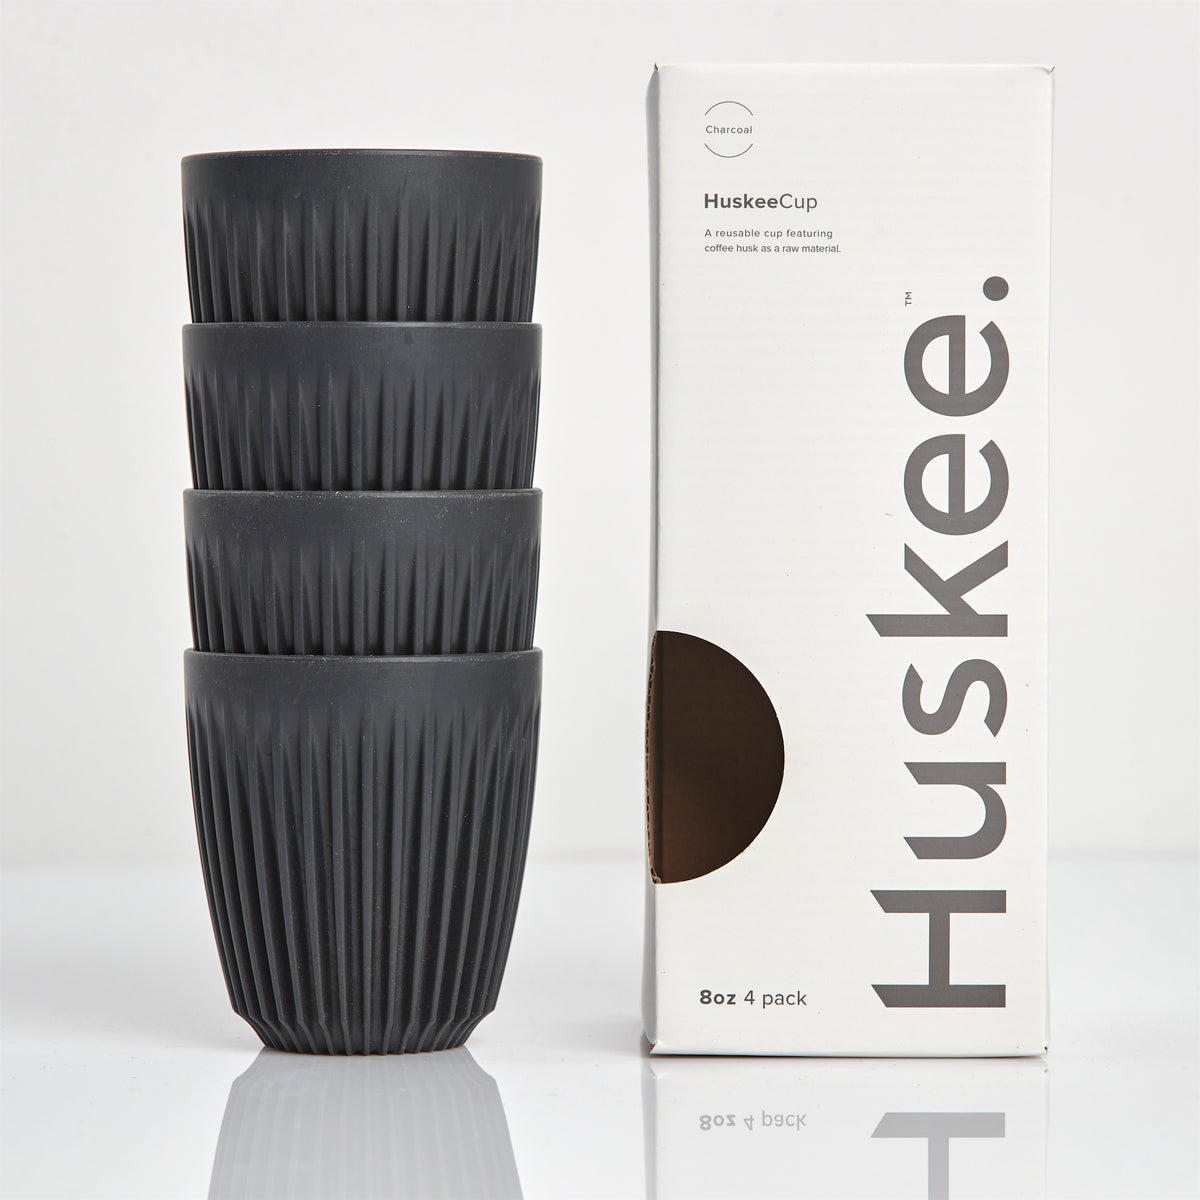 Huskee Cup - Charcoal Cup 4 pack